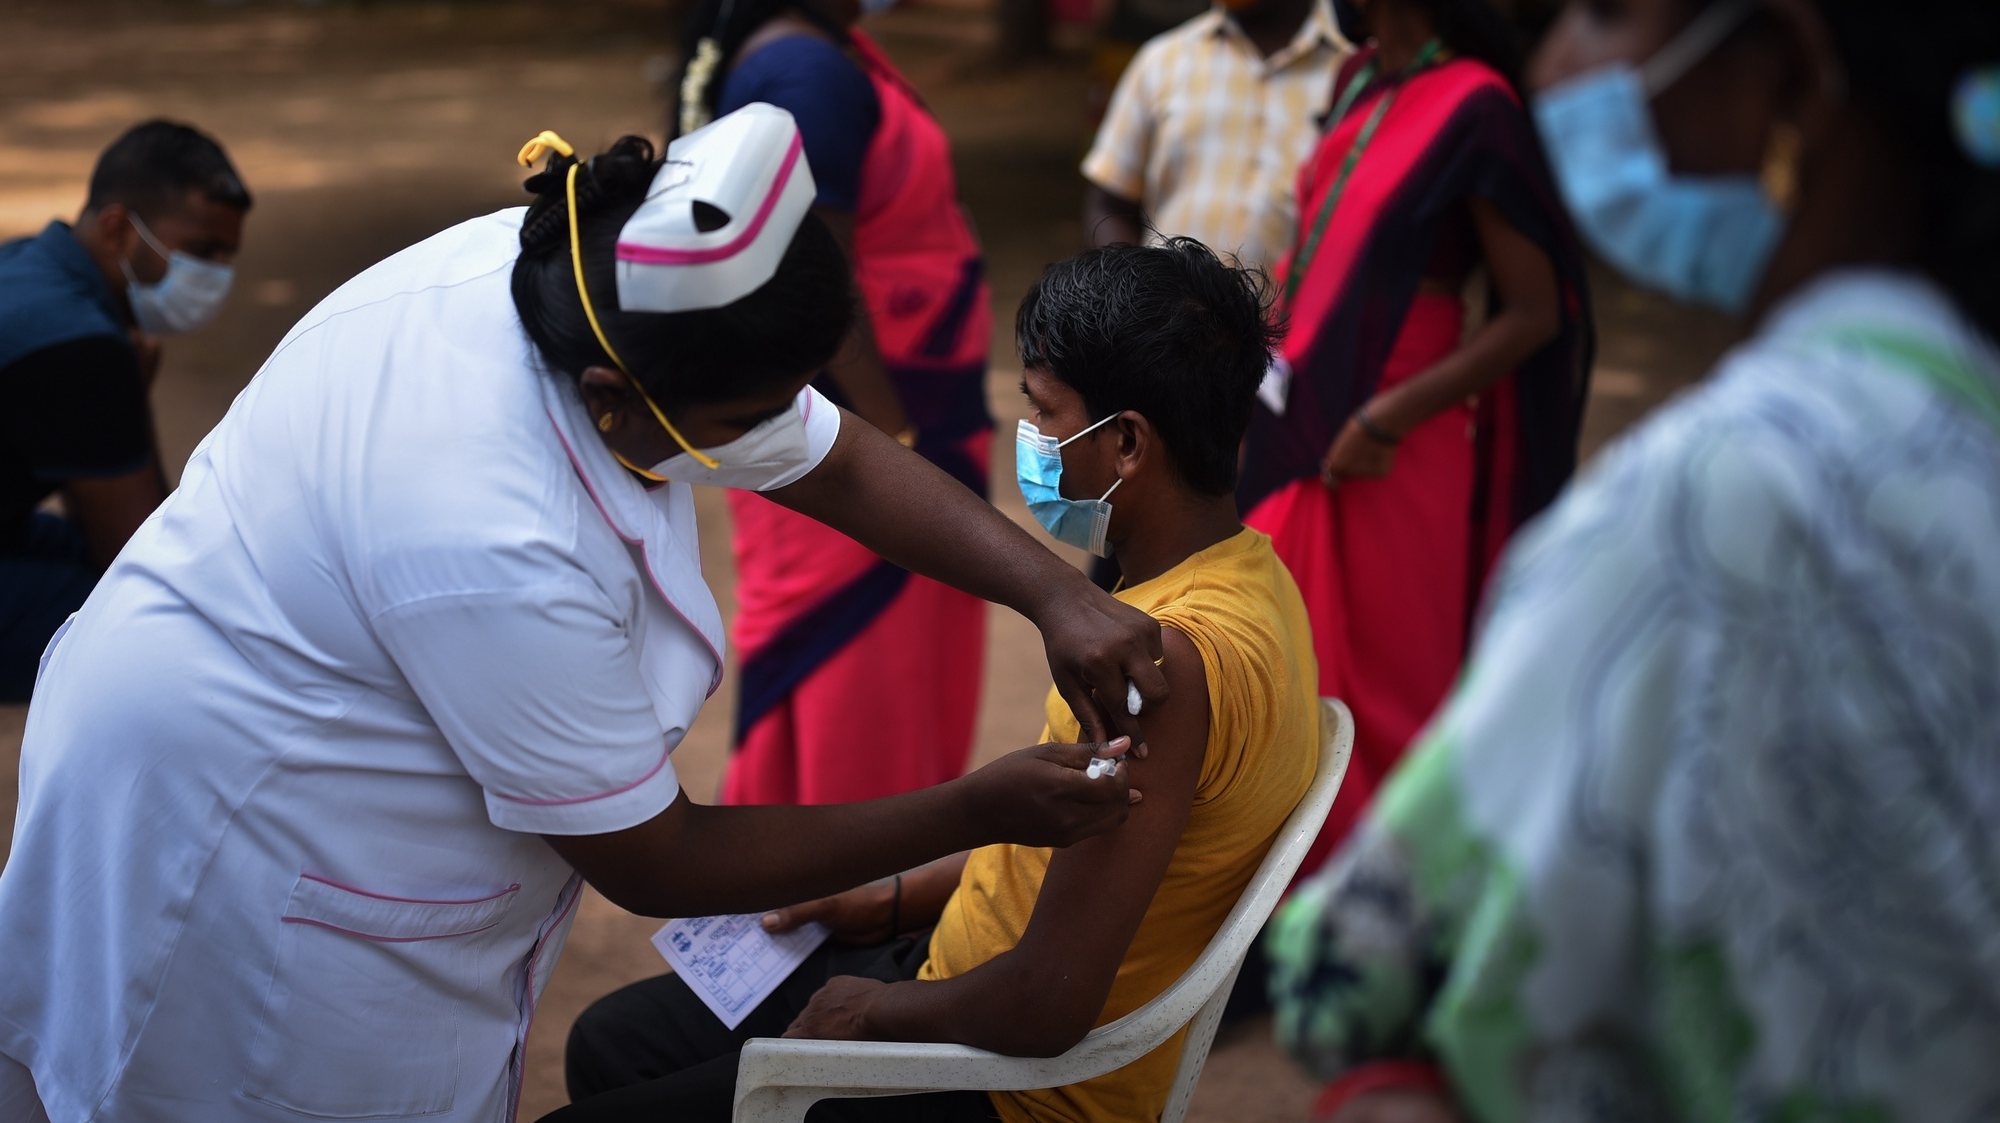 epa09463272 An Indian health worker administers a dose of COVID-19 vaccine to a man during a state wide mega-vaccination drive against the COVID-19 coronavirus, at a government school in Chennai, India, 12 September 2021. The Tamil Nadu state government organized a mega COVID-19 vaccination drive across the state for 12 hours from 7 am to 7 pm, which aims to inoculate around 2 million people above 18 years  in 40,000 government centers on 12 September 2021. The state government is conducting the mega vaccination drive to avoid the possible third COVID-19 wave. The Greater Chennai Corporation (GCC) has set-up 1600 special vaccination camps as part of the state wide mega COVID-19 vaccination drive in Chennai.  EPA/IDREES MOHAMMED